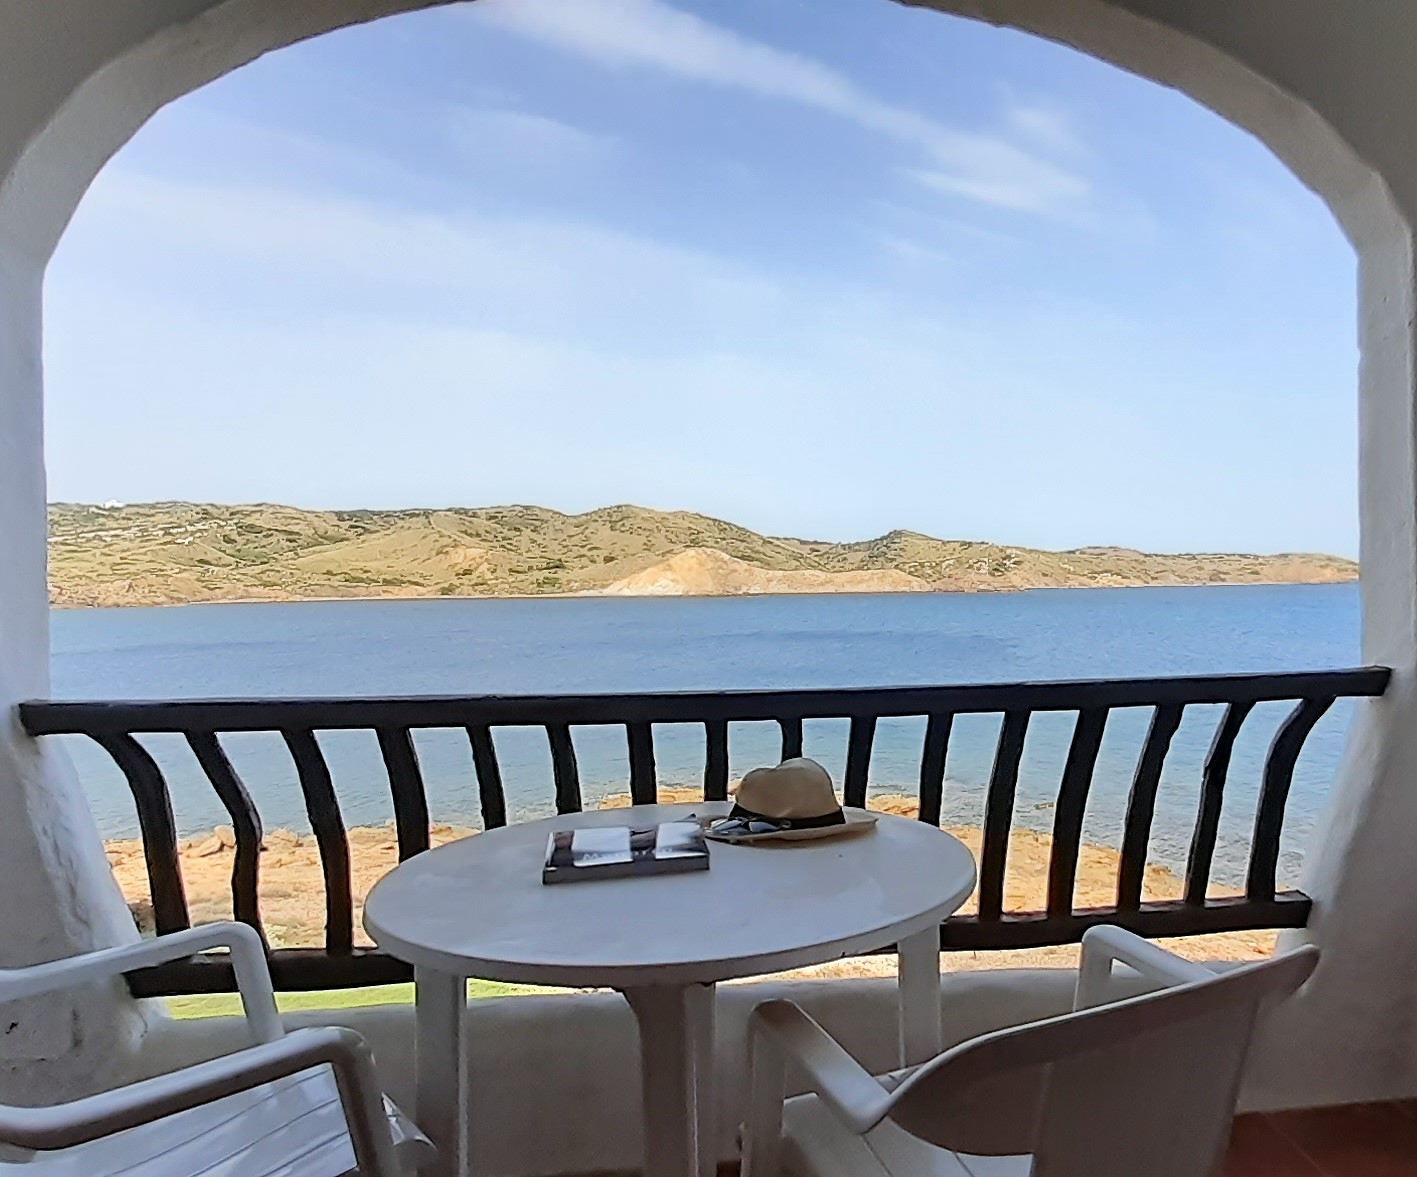 Apartaments Poblet C4 - Sea view from the balcony - Apartment in Minorca - Playas de Fornells - Minorca